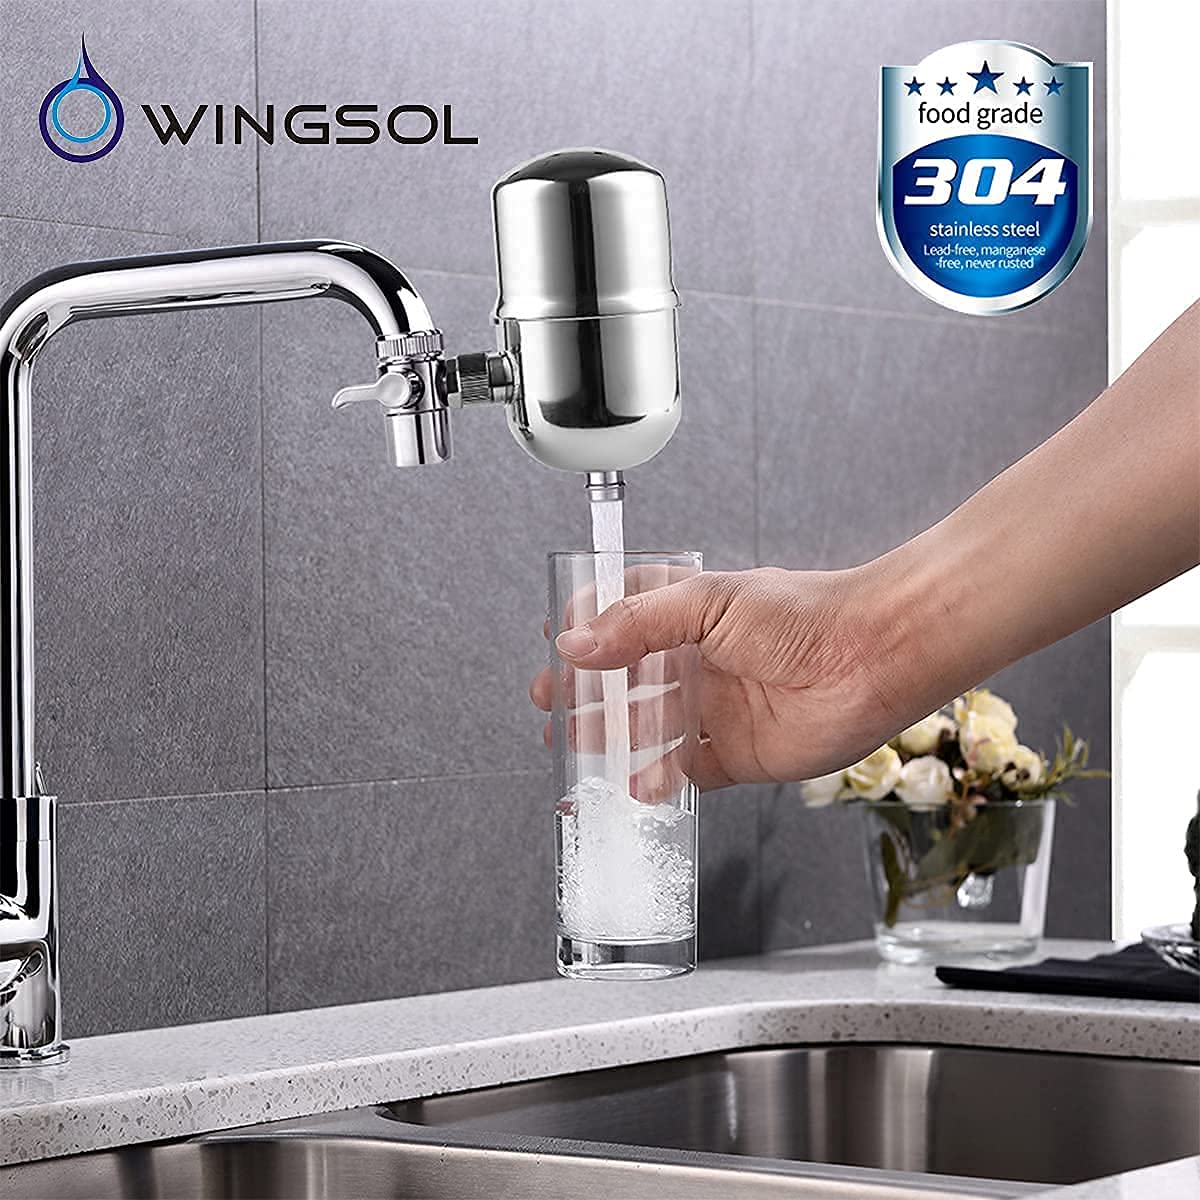 WINGSOL Faucet Water Filter Replacement Cartridge, Reduce 99.6% Lead Chlorine Odor, Alkalize Water, Mineralize Water, Multi-function NSF/ANSI 42&53, Compatible with WINGSOL Faucet Filter